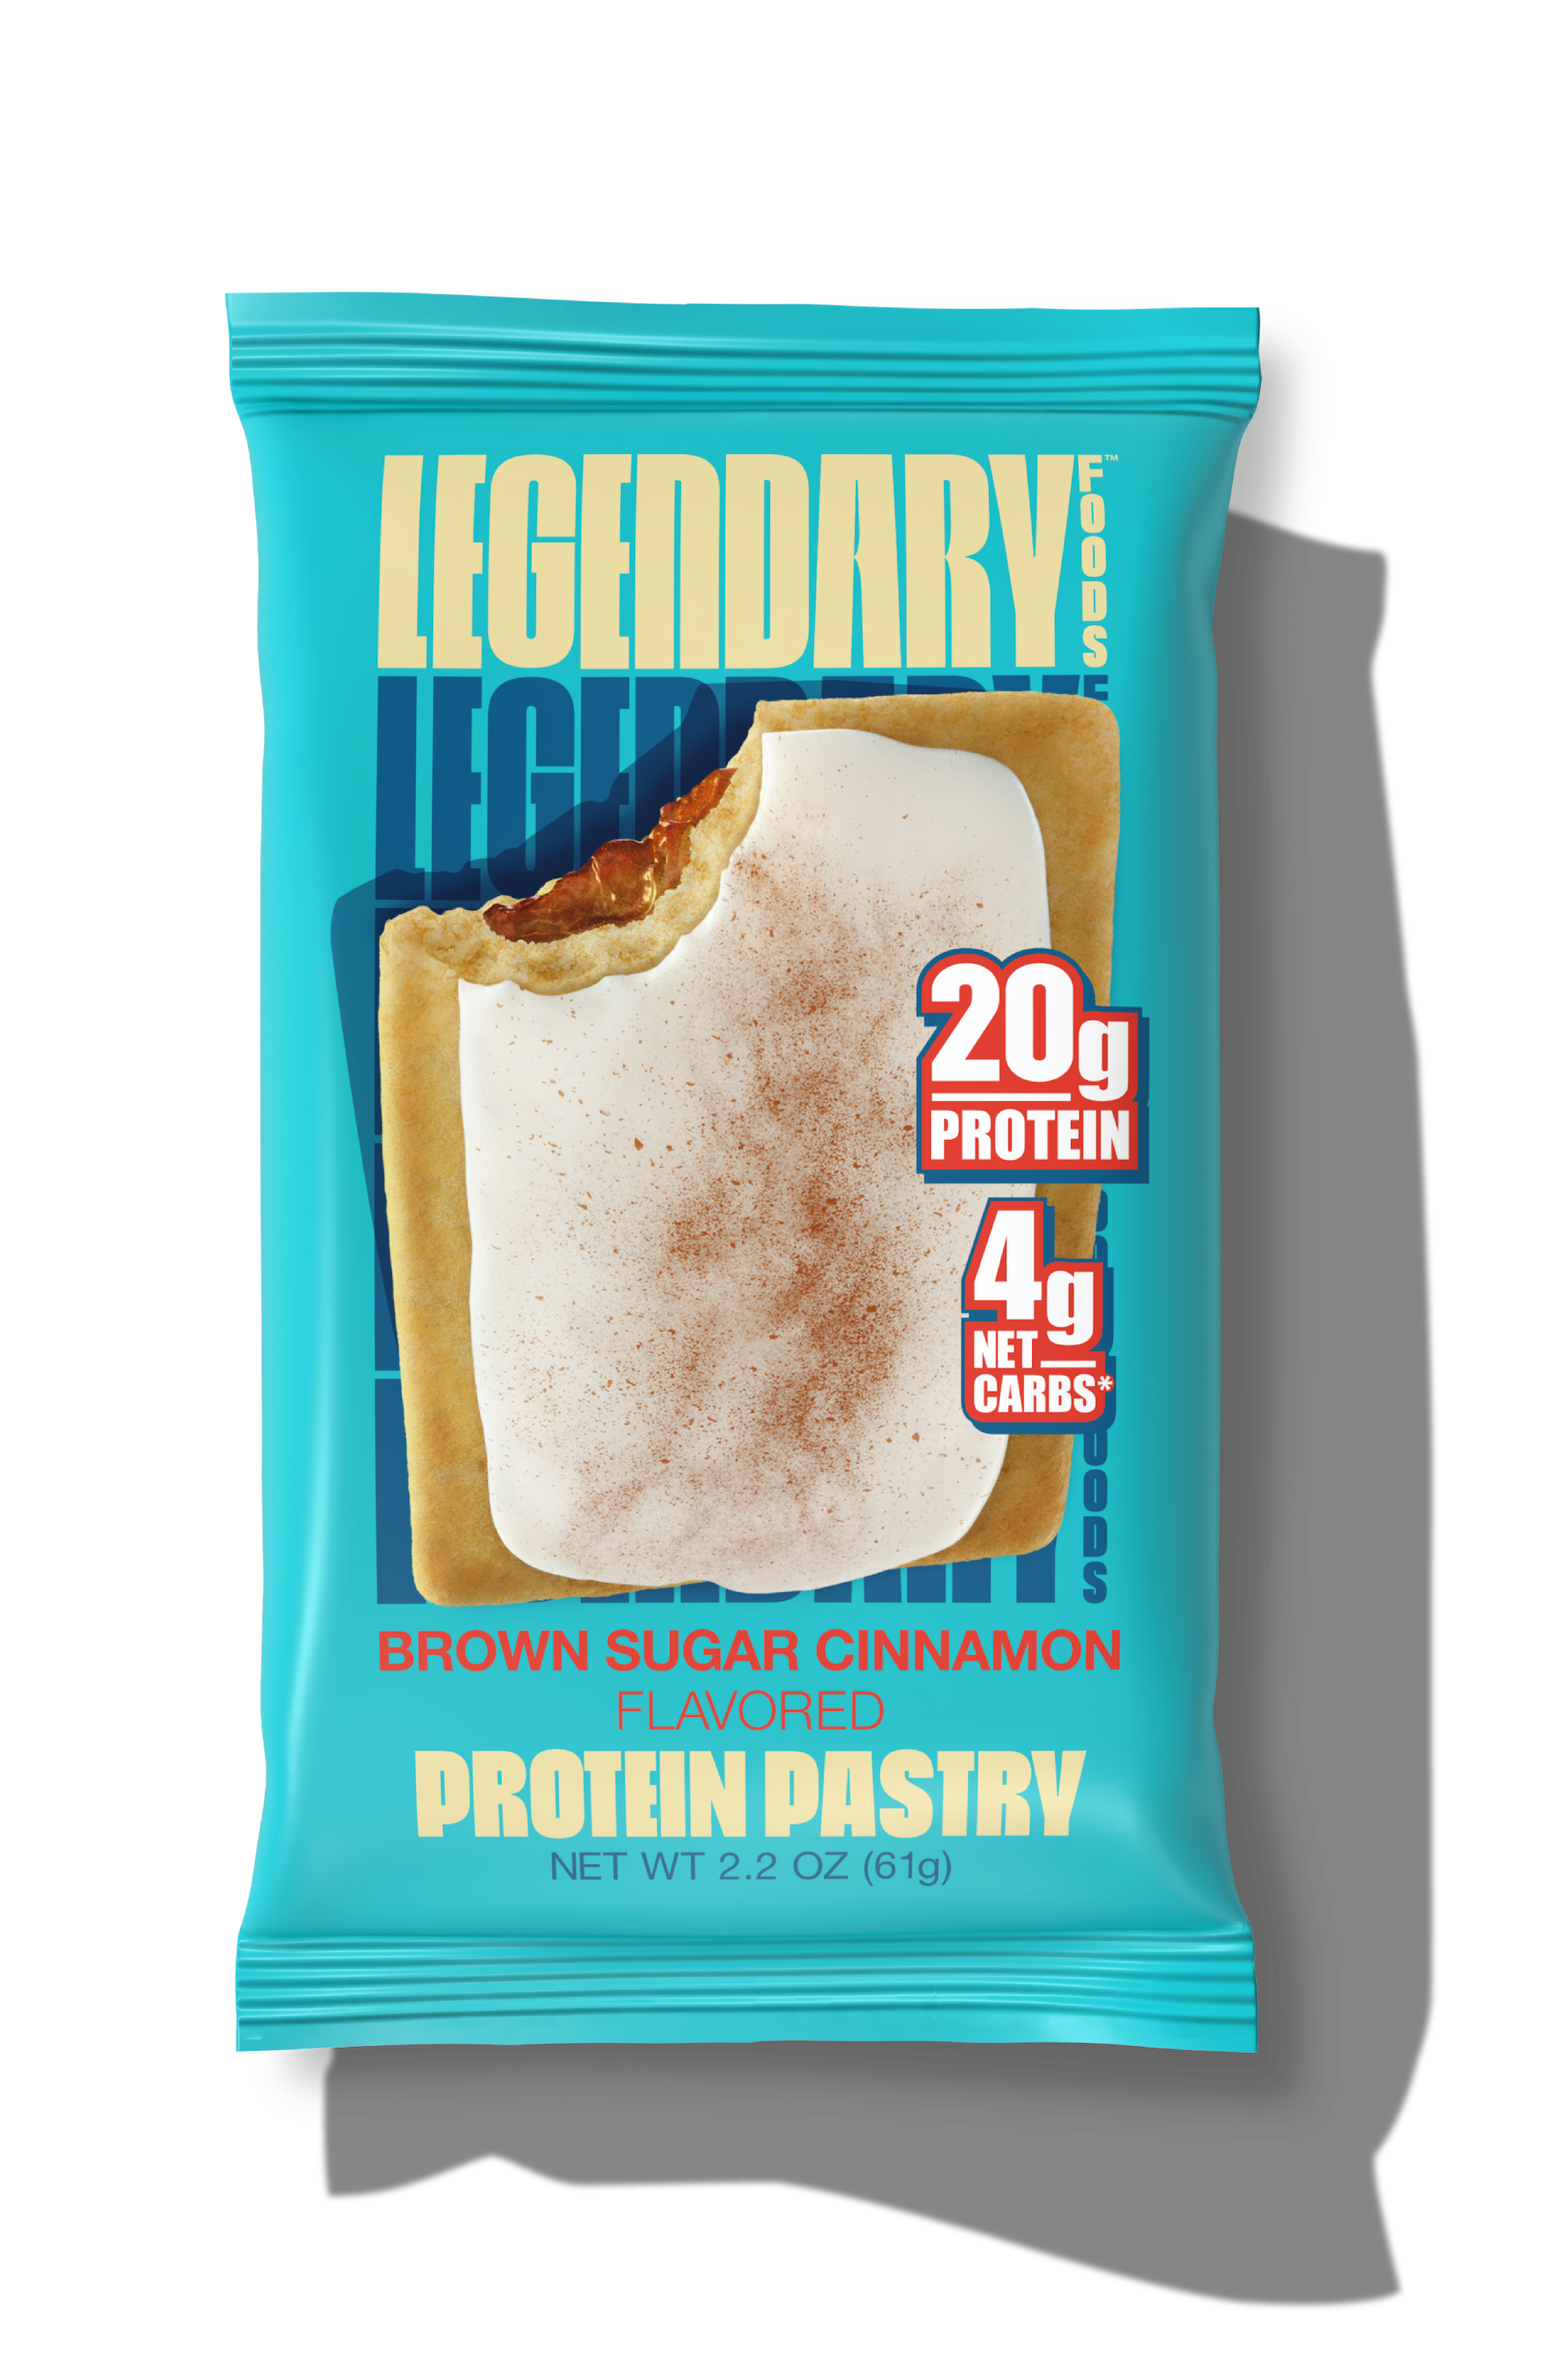 "Cake Style" Low-Carb Protein Pastry by Legendary Foods - Brown Sugar Cinnamon